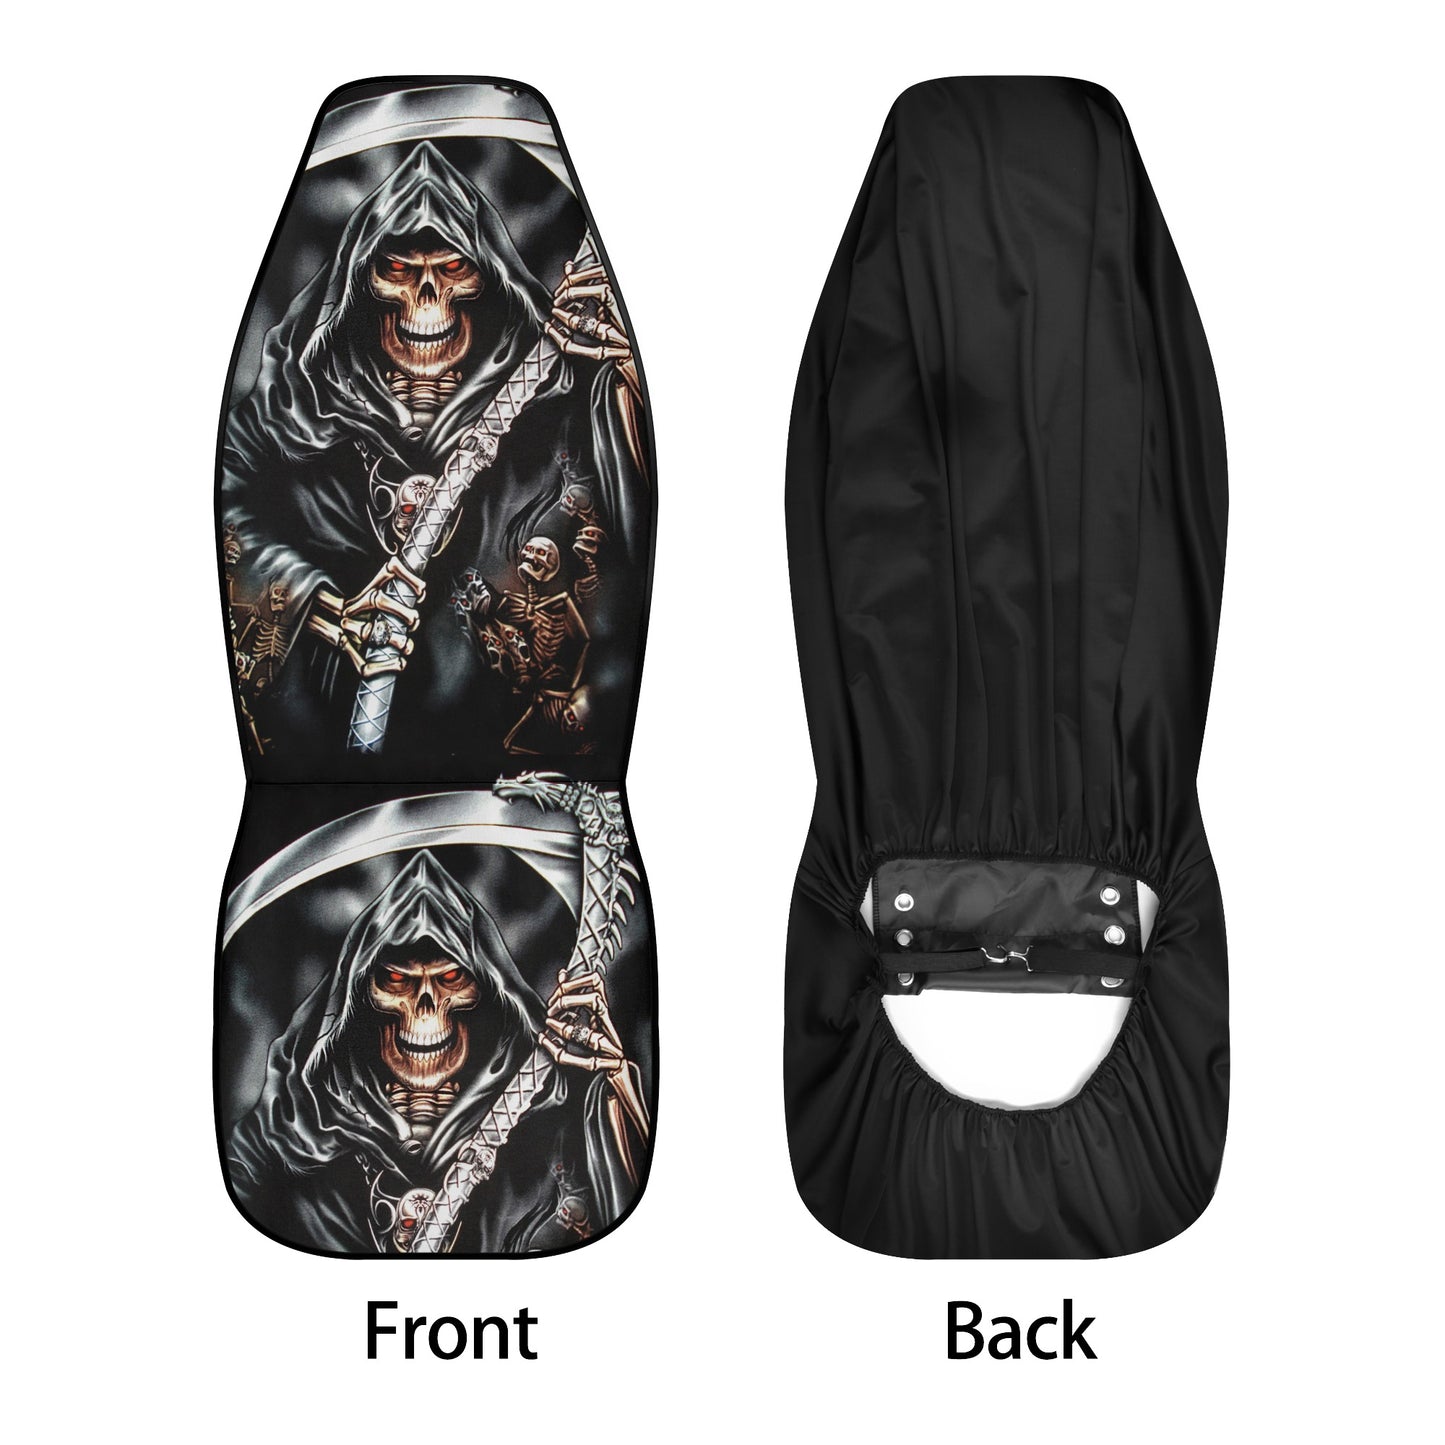 Car Seat Cover SetSkull in fire seat cover for car, flower skull car accessories, skull car rug, evil cover cushion accessories for Cars, skull in fire seat c